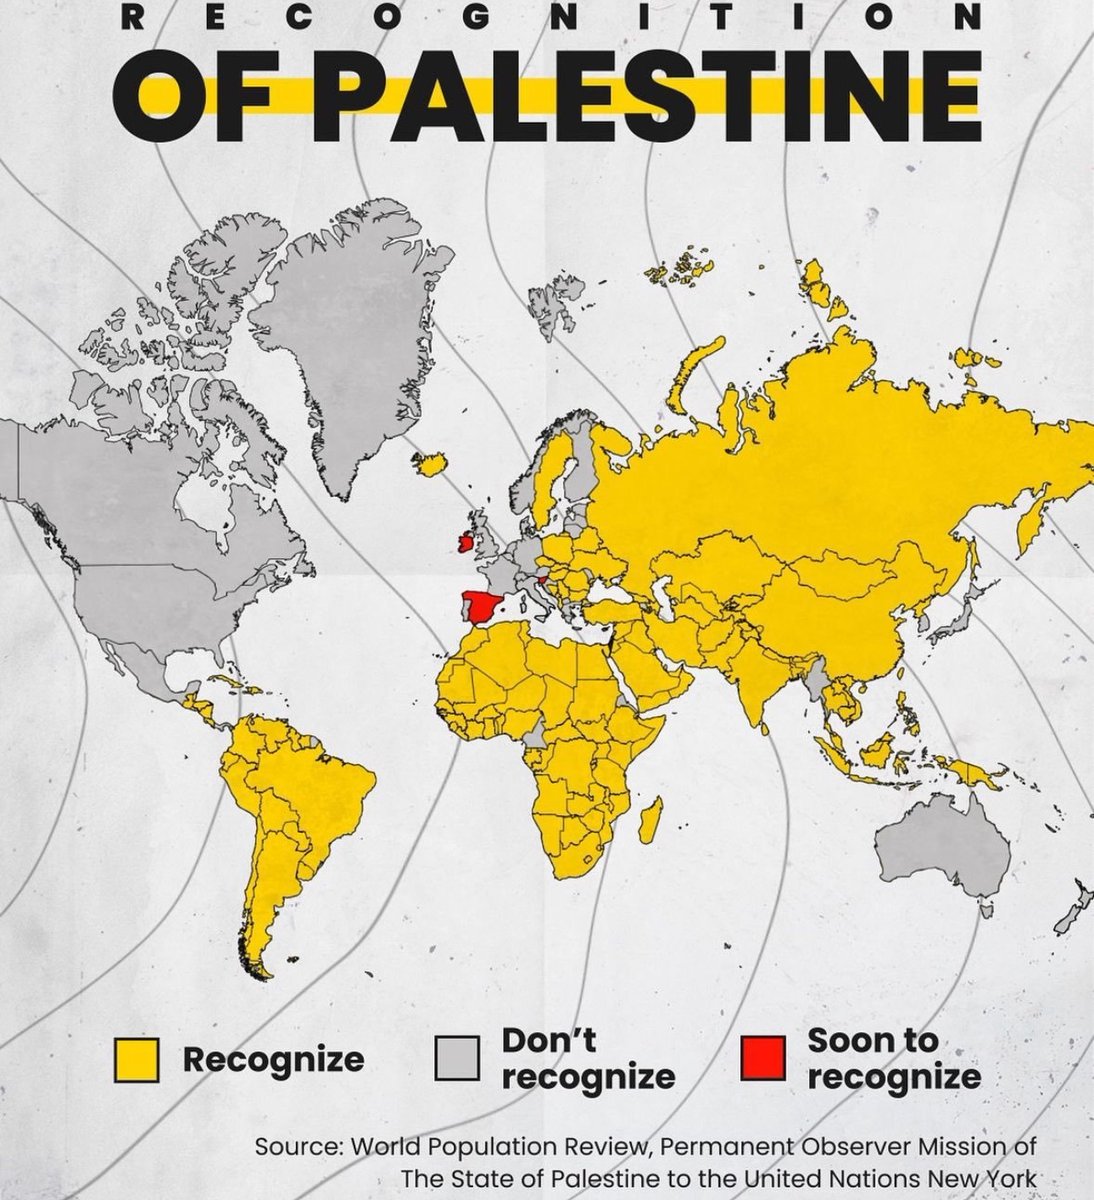 MOST OF THE WORLD RECOGNISES PALESTINE